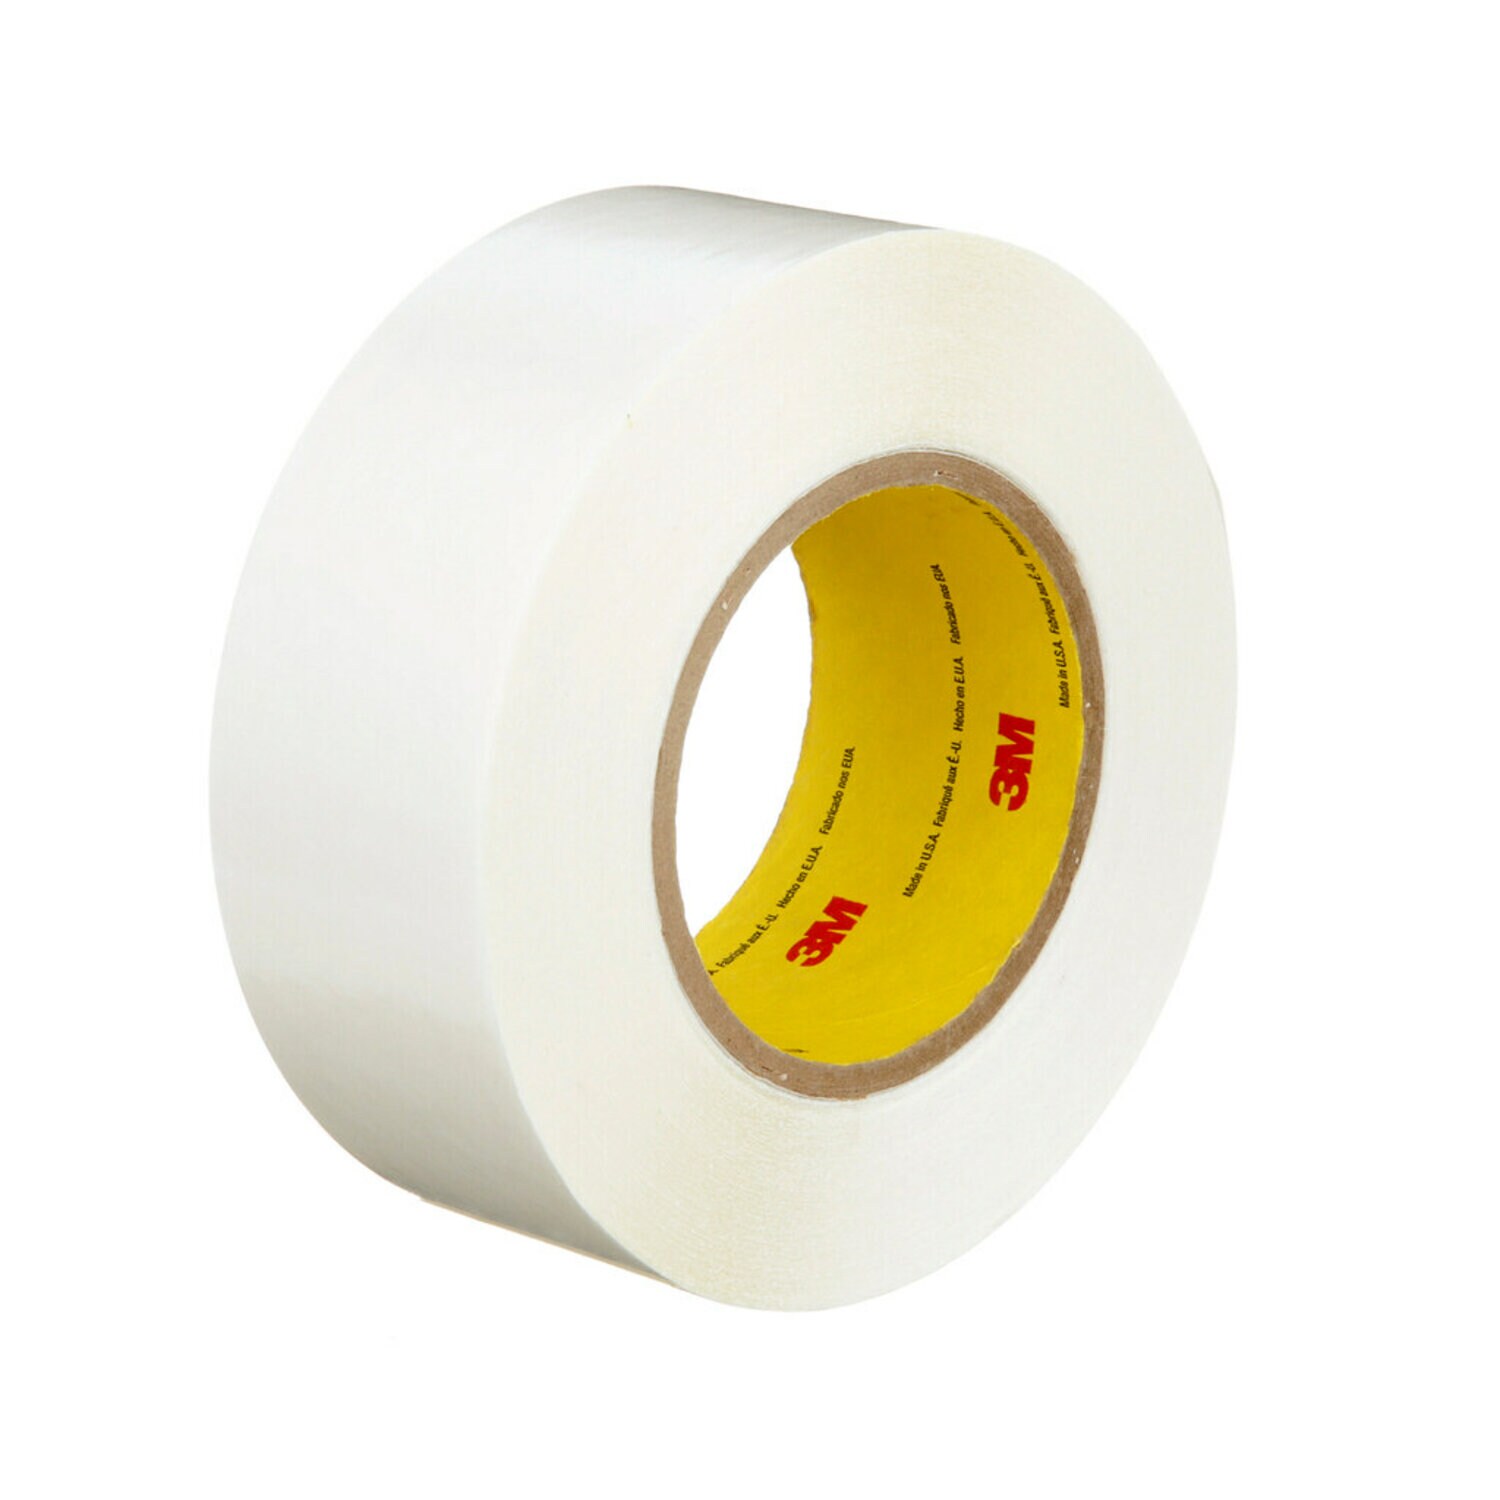 7010373864 - 3M Double Coated Tape 9579, White, 3 in x 36 yd, 9 mil, 12 rolls per
case